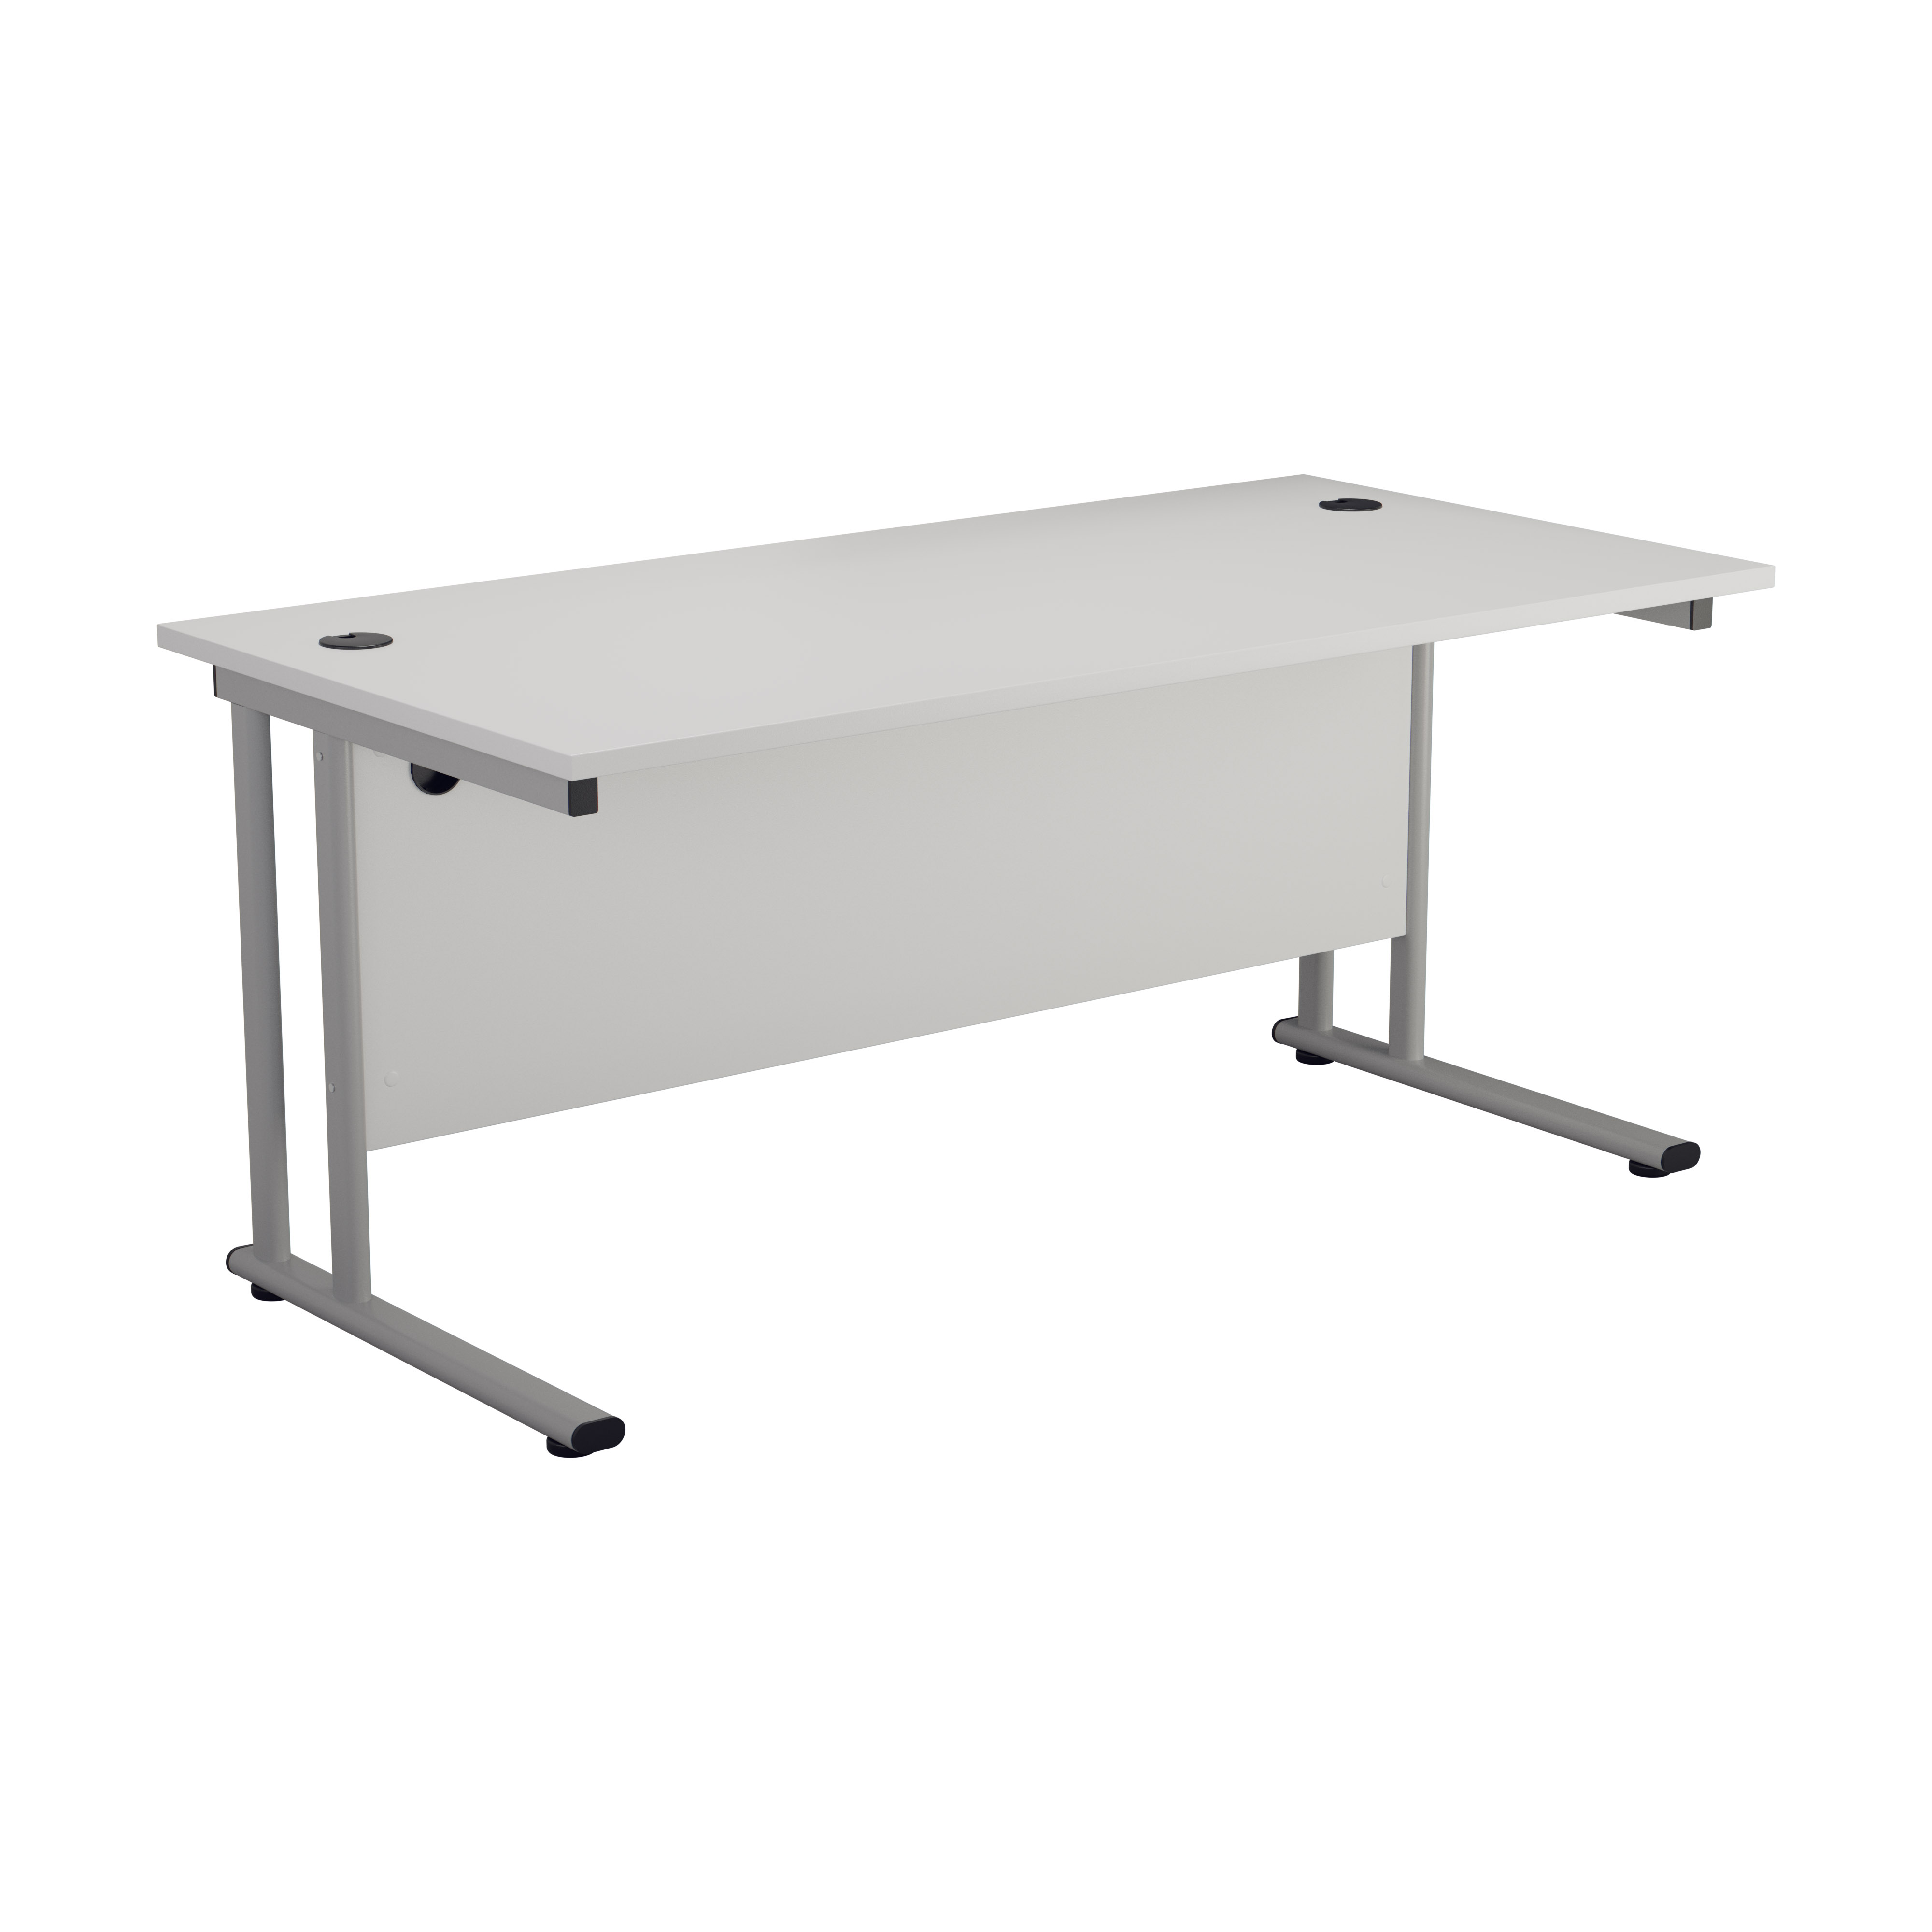 Start 1400 Rectangular Cantilever Workstation - White Top and Silver Legs